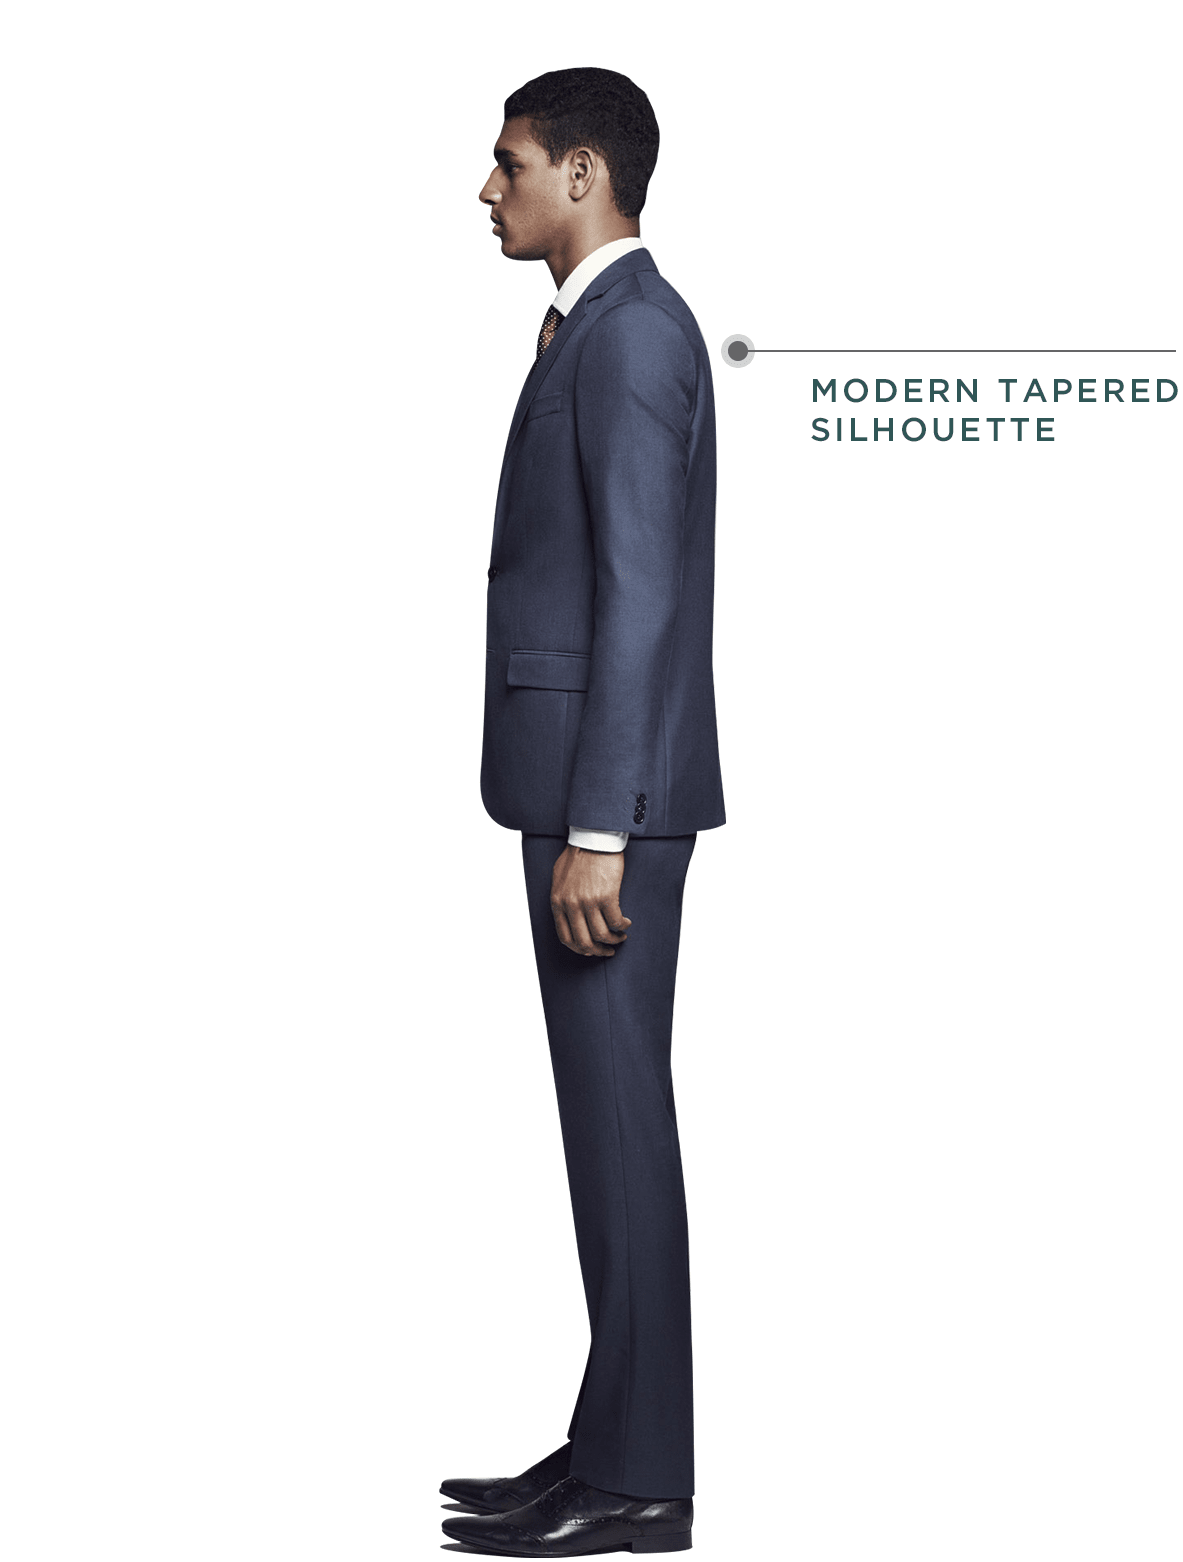 Slim Fit Suits, Size Guide